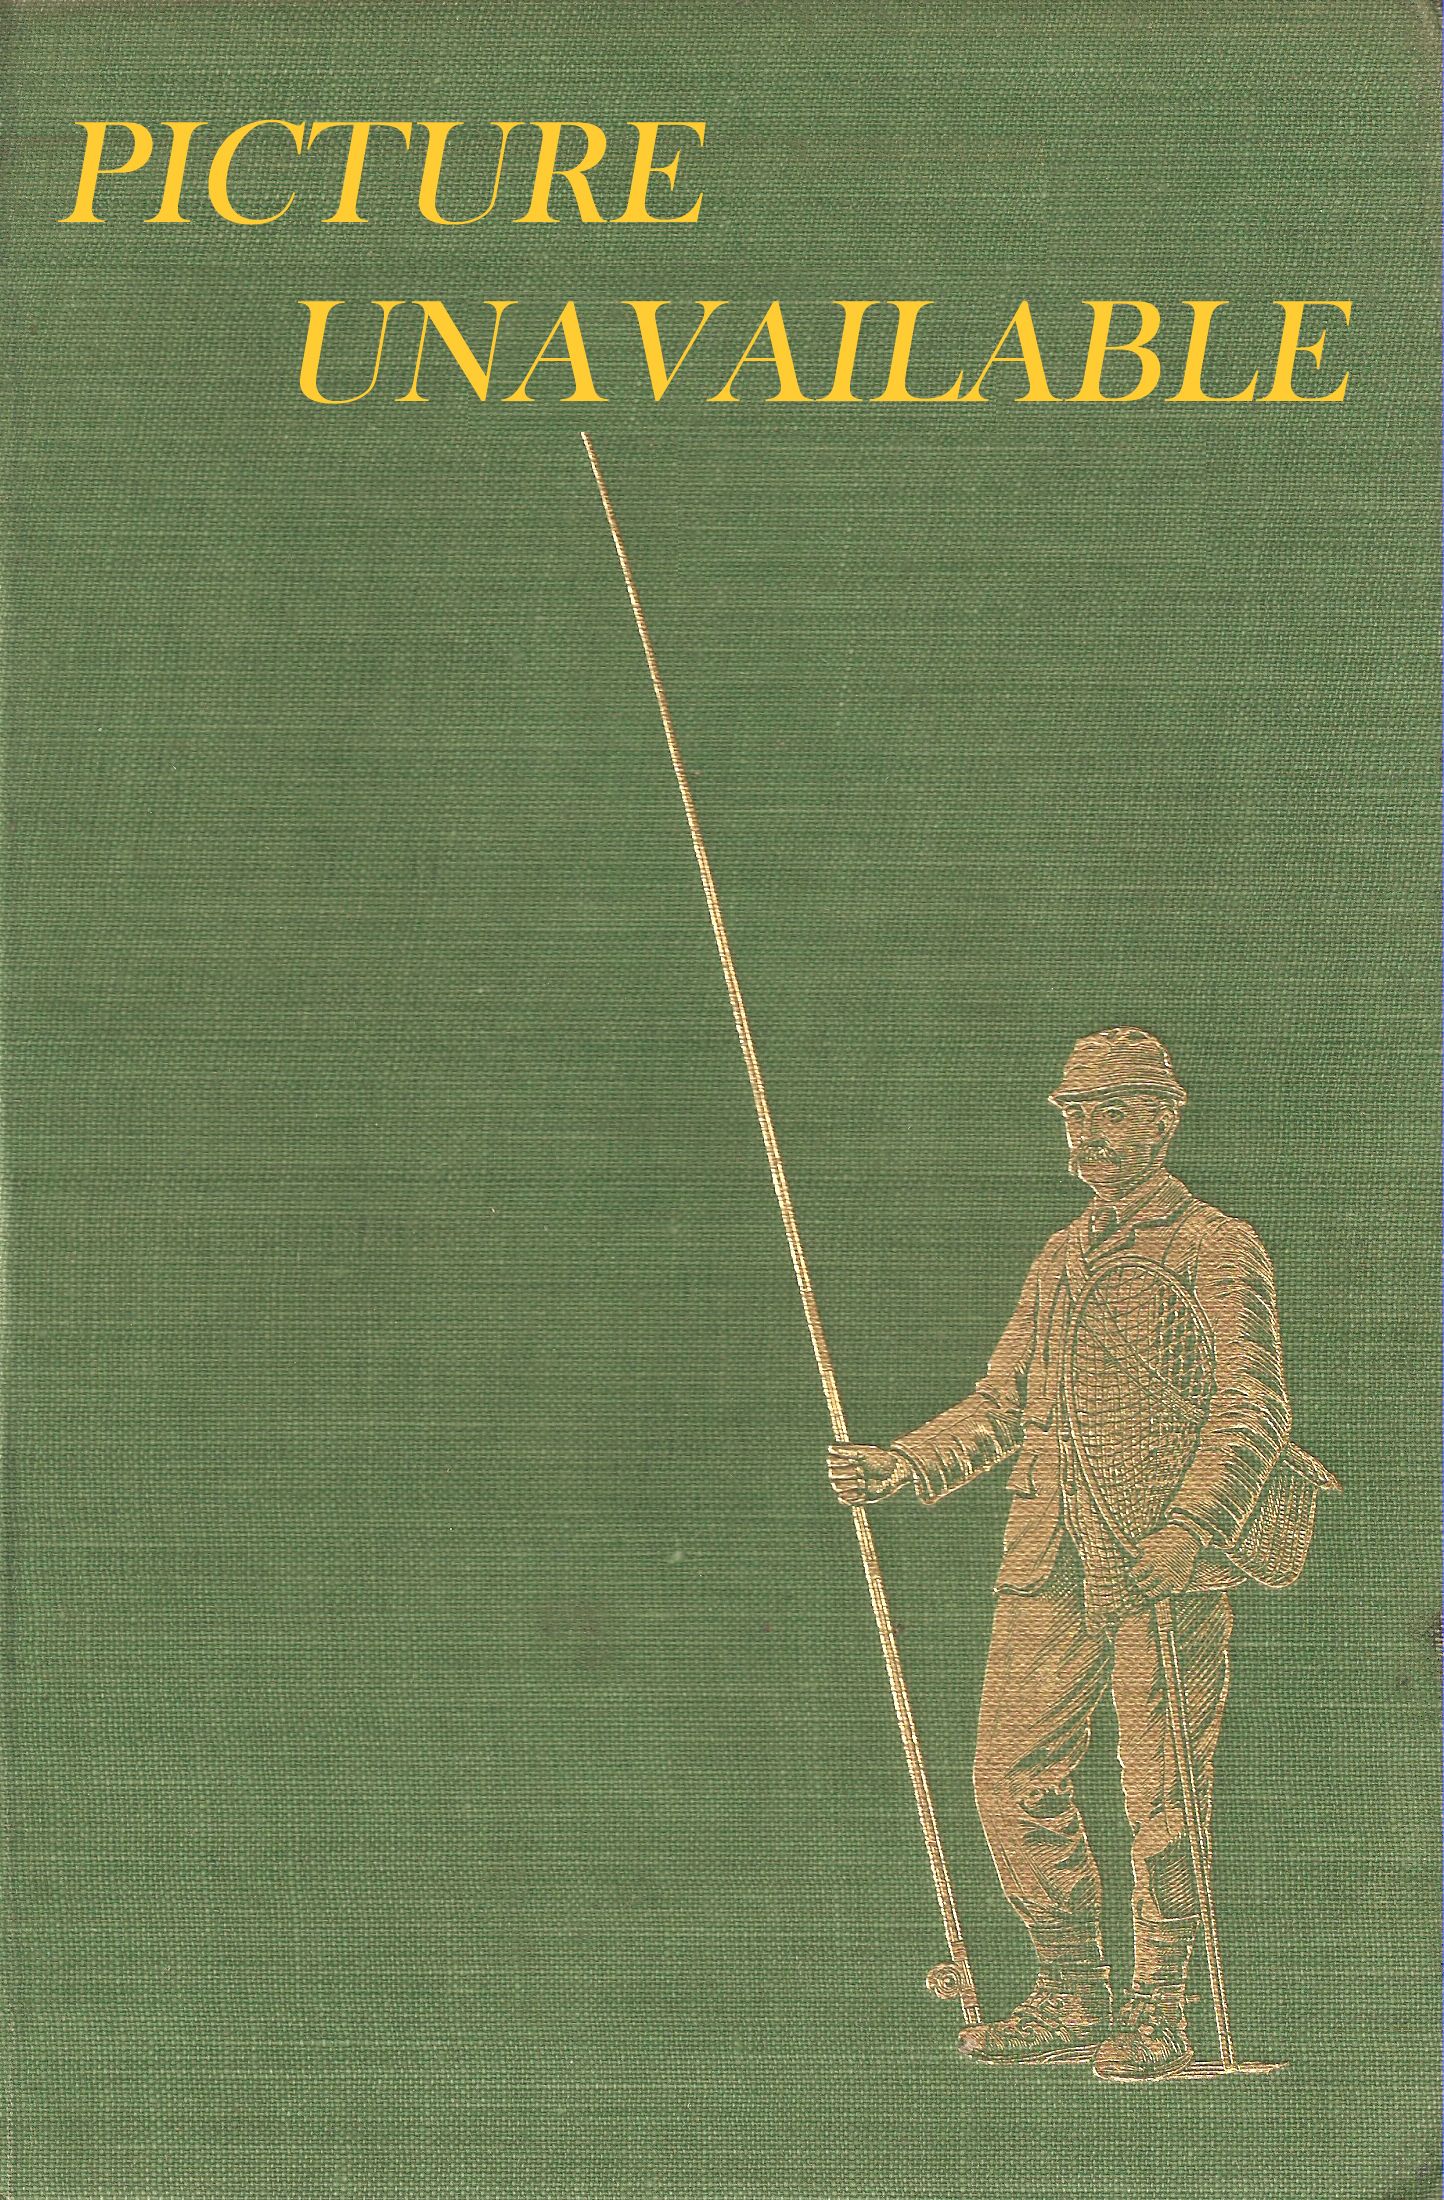 THE FISHERMAN'S VADE MECUM: A COMPENDIUM OF PRECEPTS, COUNSEL, KNOWLEDGE  AND EXPERIENCE IN MOST MATTERS PERTAINING TO FISHING FOR TROUT, SEA TROUT,  SALMON AND PIKE. By G.W. Maunsell.